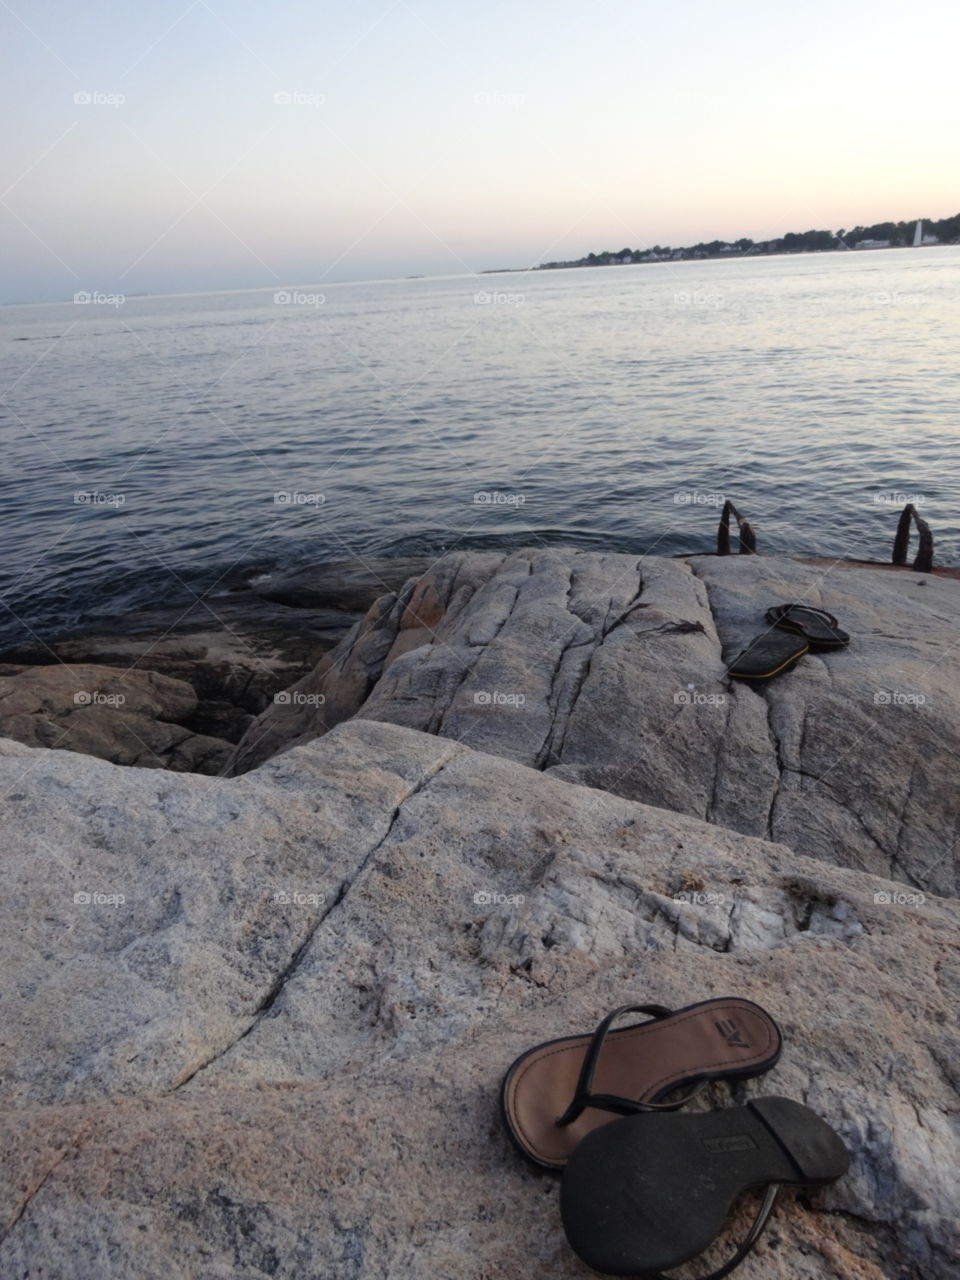 A couple on an adventure on the coast of Connecticut leaving their flip flops behind.